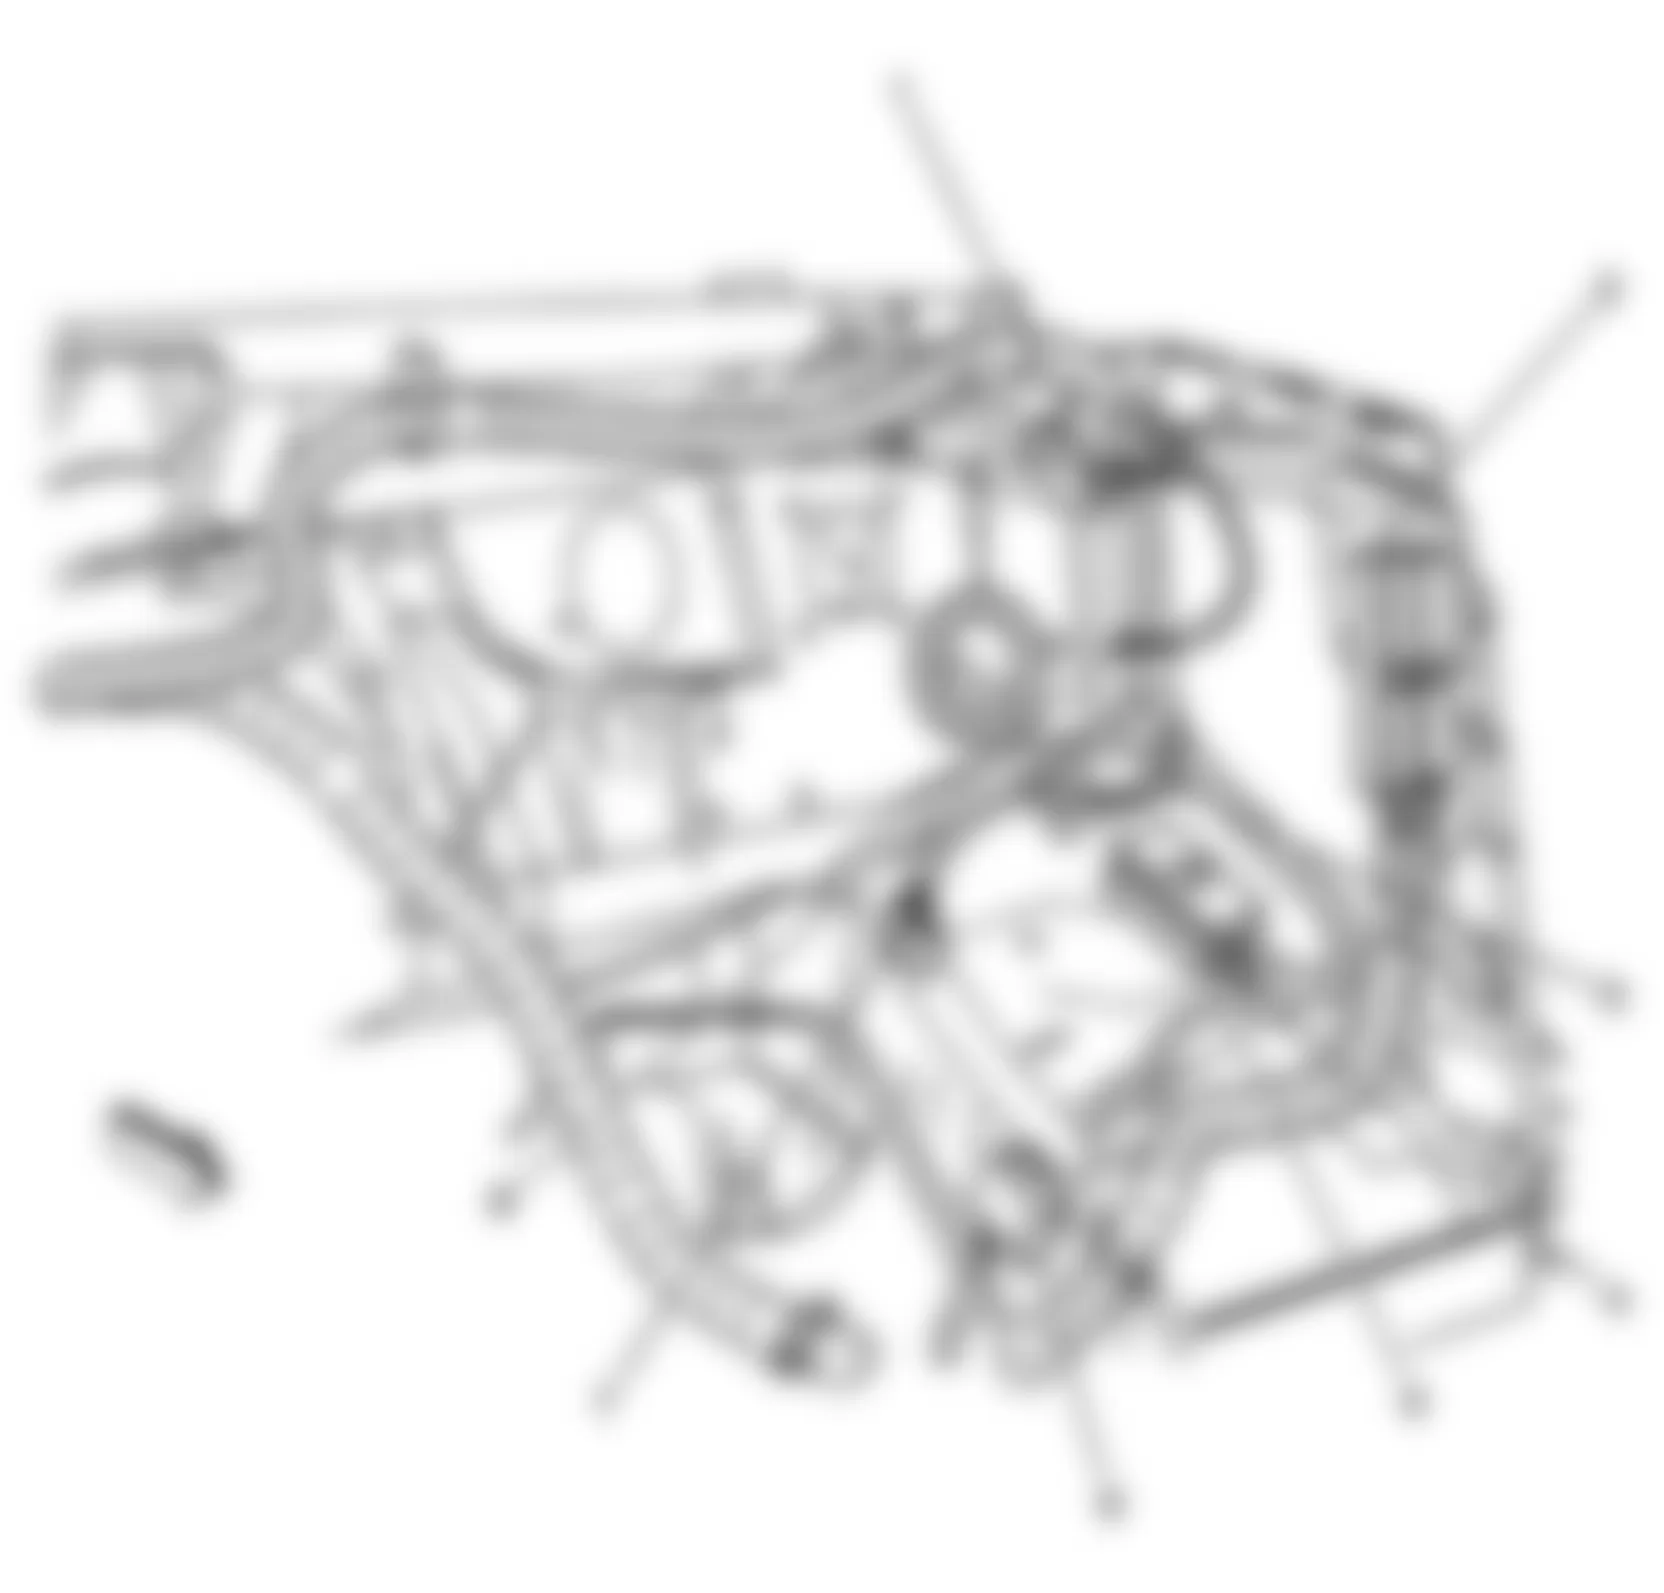 GMC Savana G1500 2010 - Component Locations -  Left Rear Of Engine Compartment